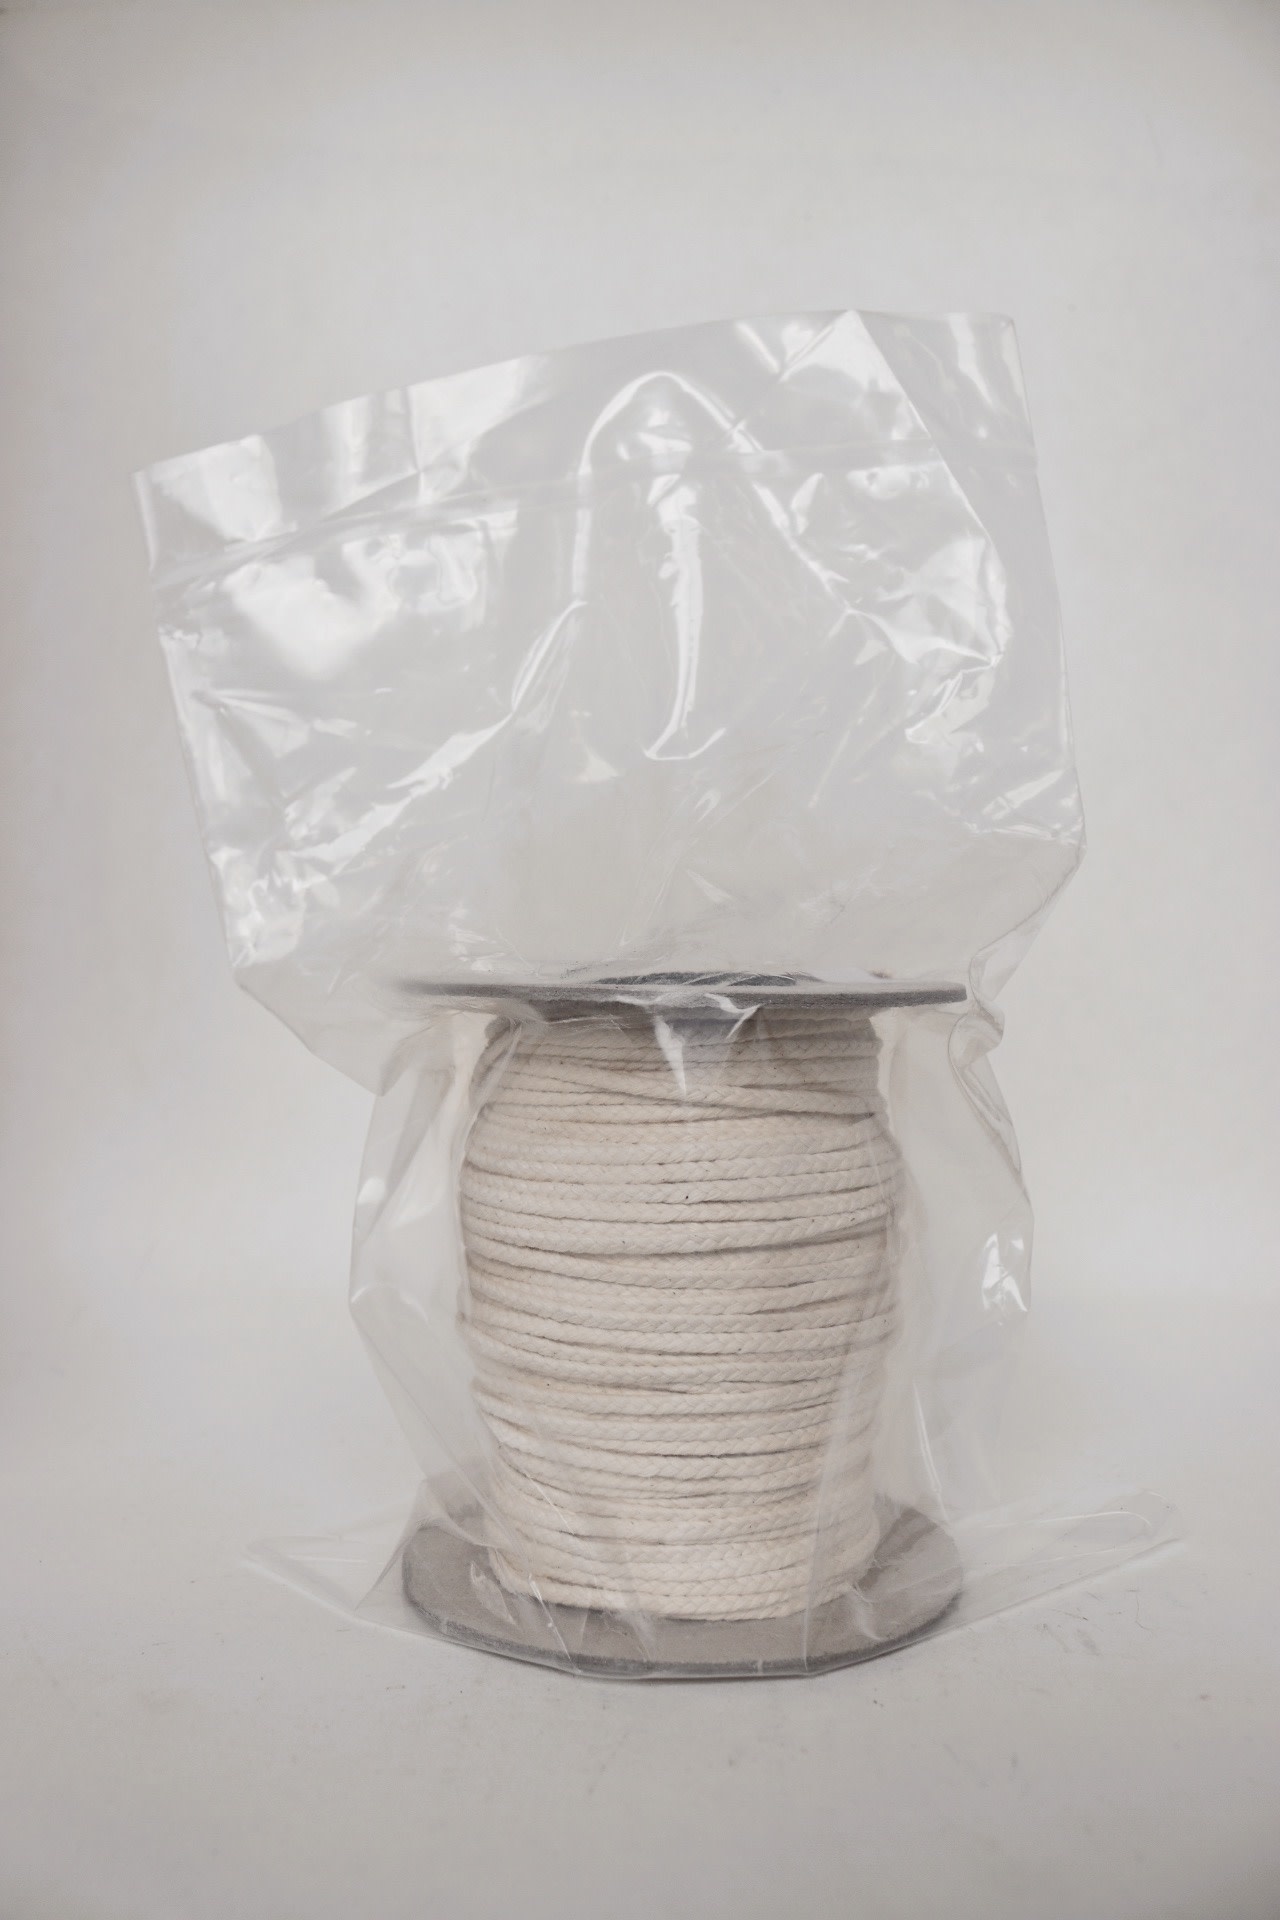 60 Ply Cotton Wicking - Queen Right Colonies